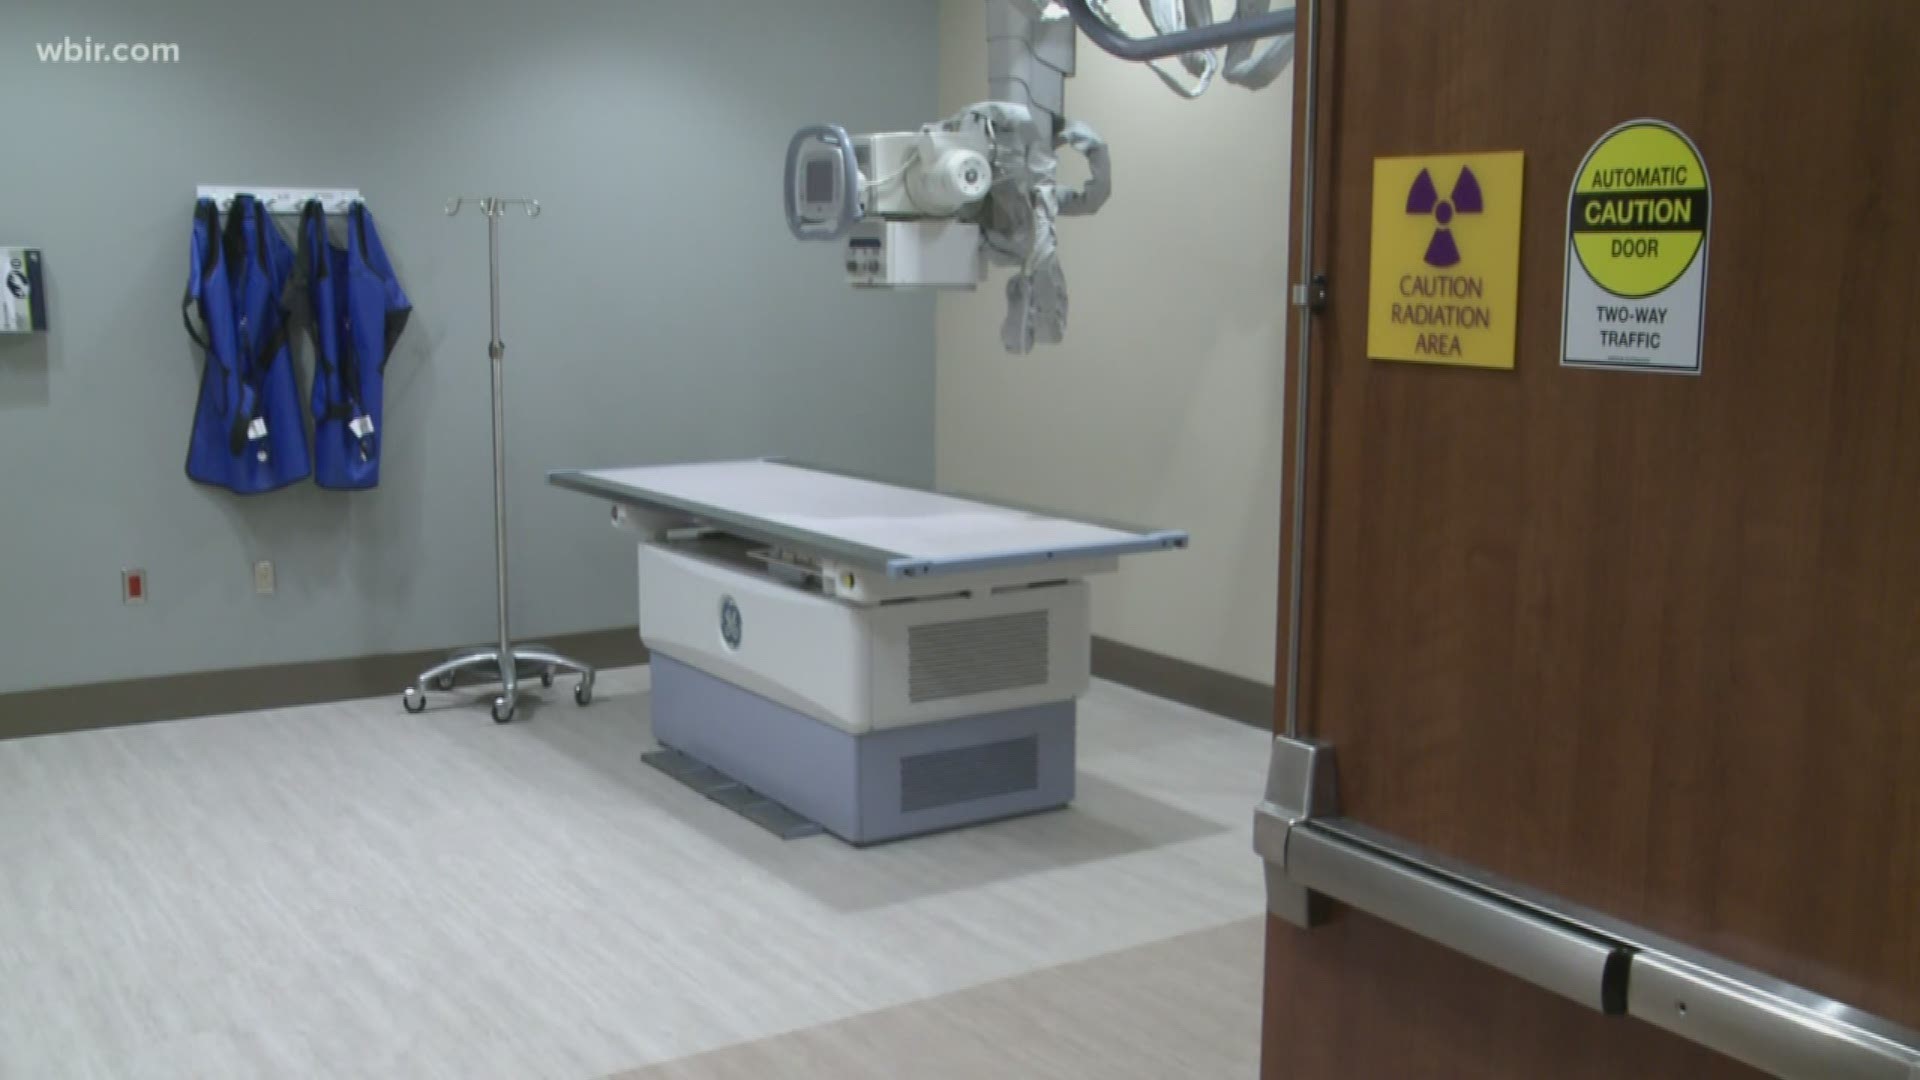 The new ER is twice the size of the old one and features more private rooms and upgraded technology. It opens March 7.